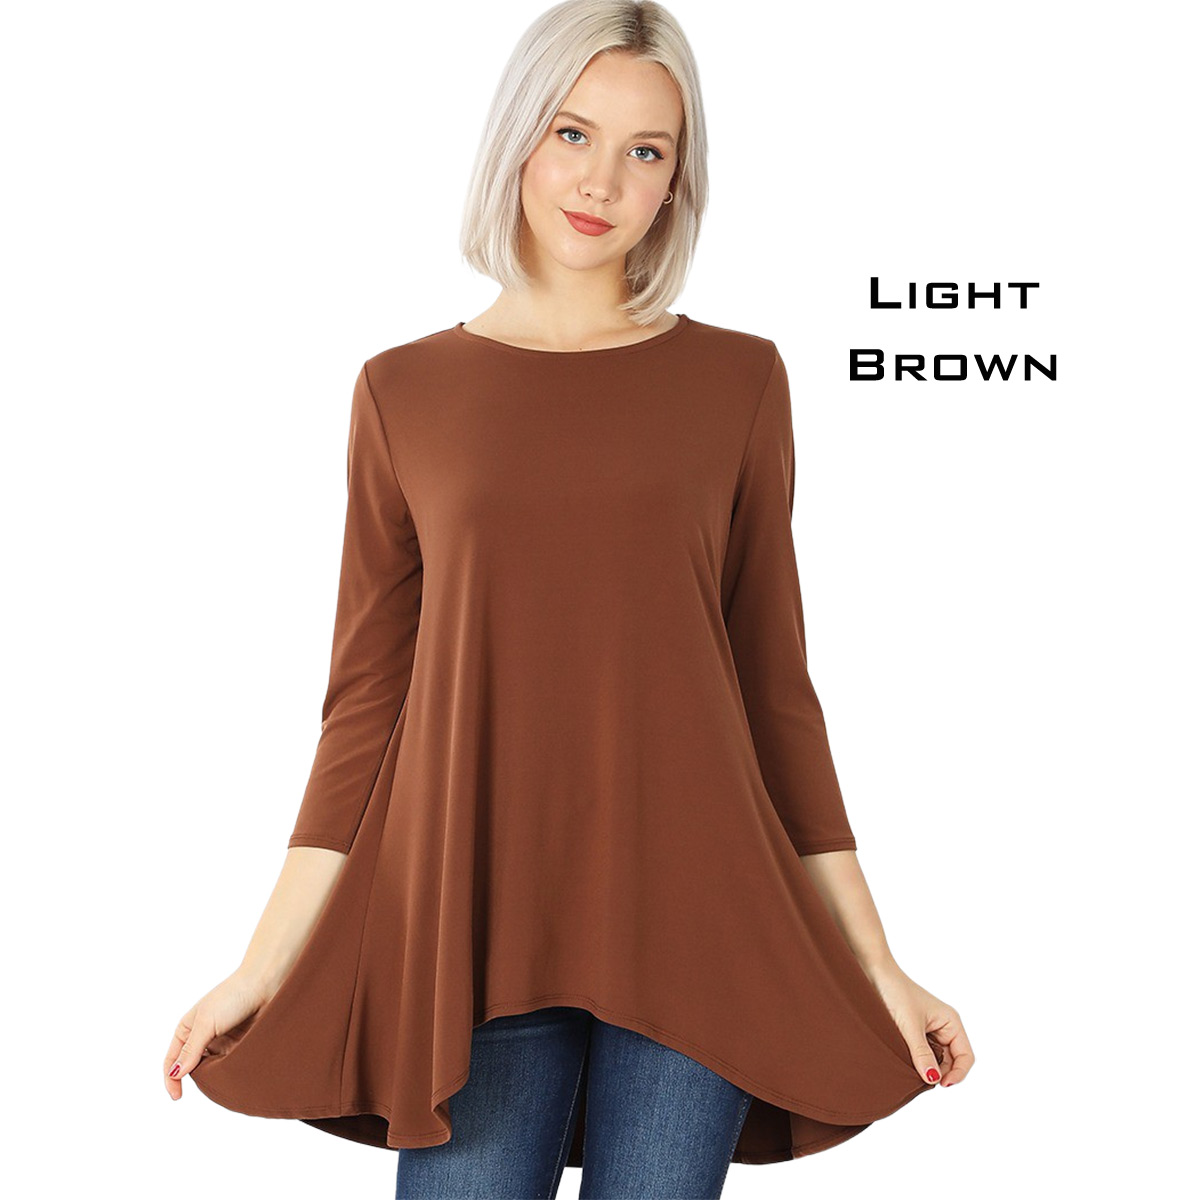 LIGHT BROWN Ity High-Low 3/4 Sleeve Top 2367